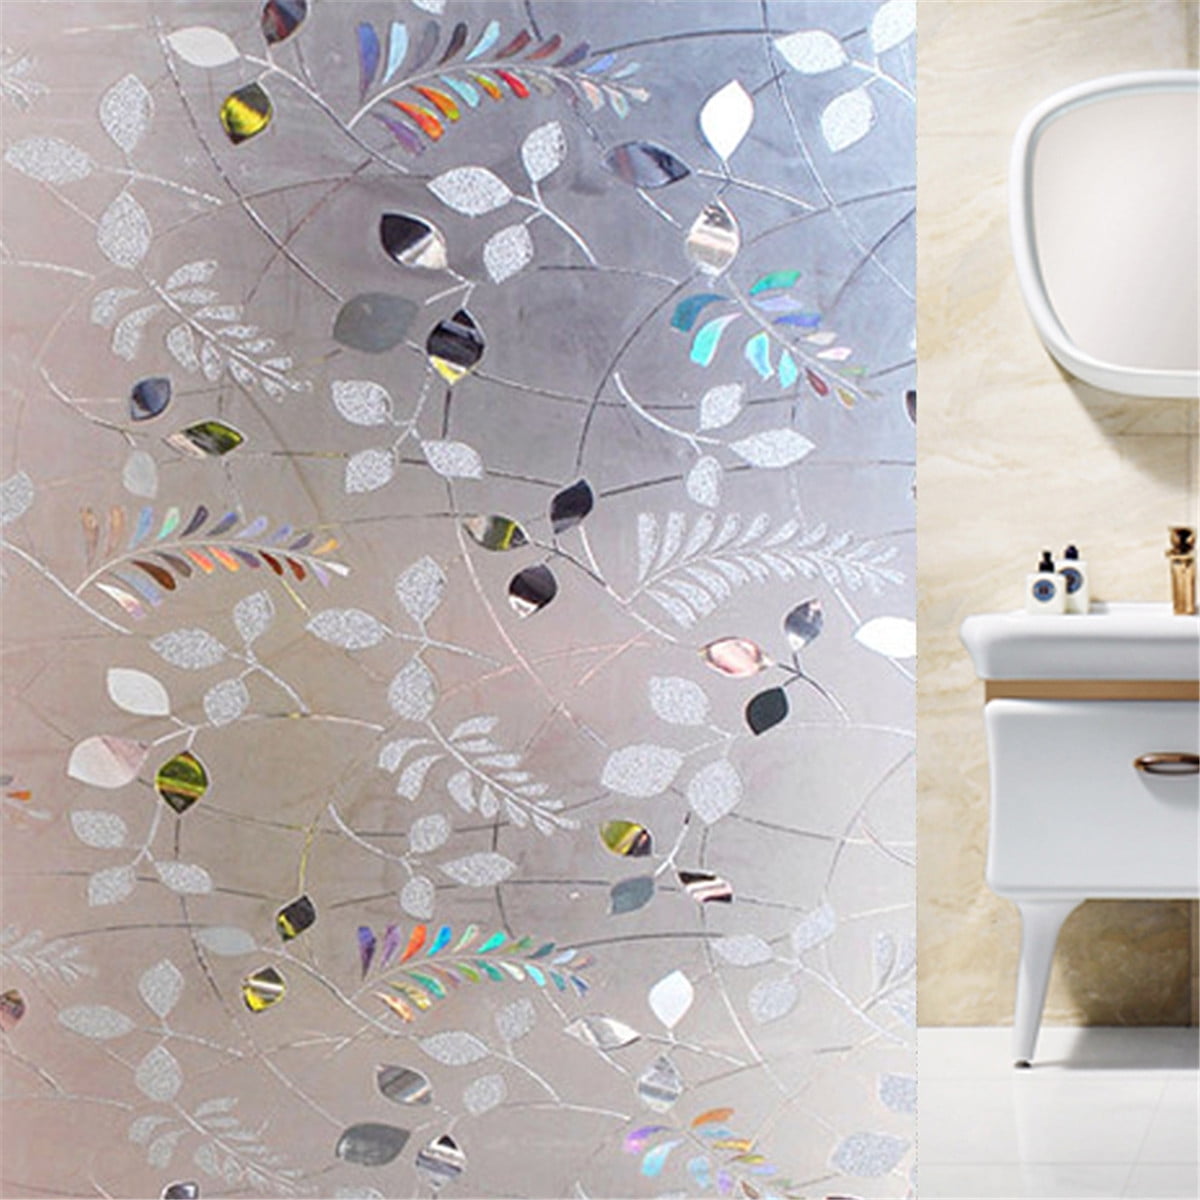 Details about   Privacy Frosted Glass Sticker Window Film Office Bathroom Static Cling No Glue 